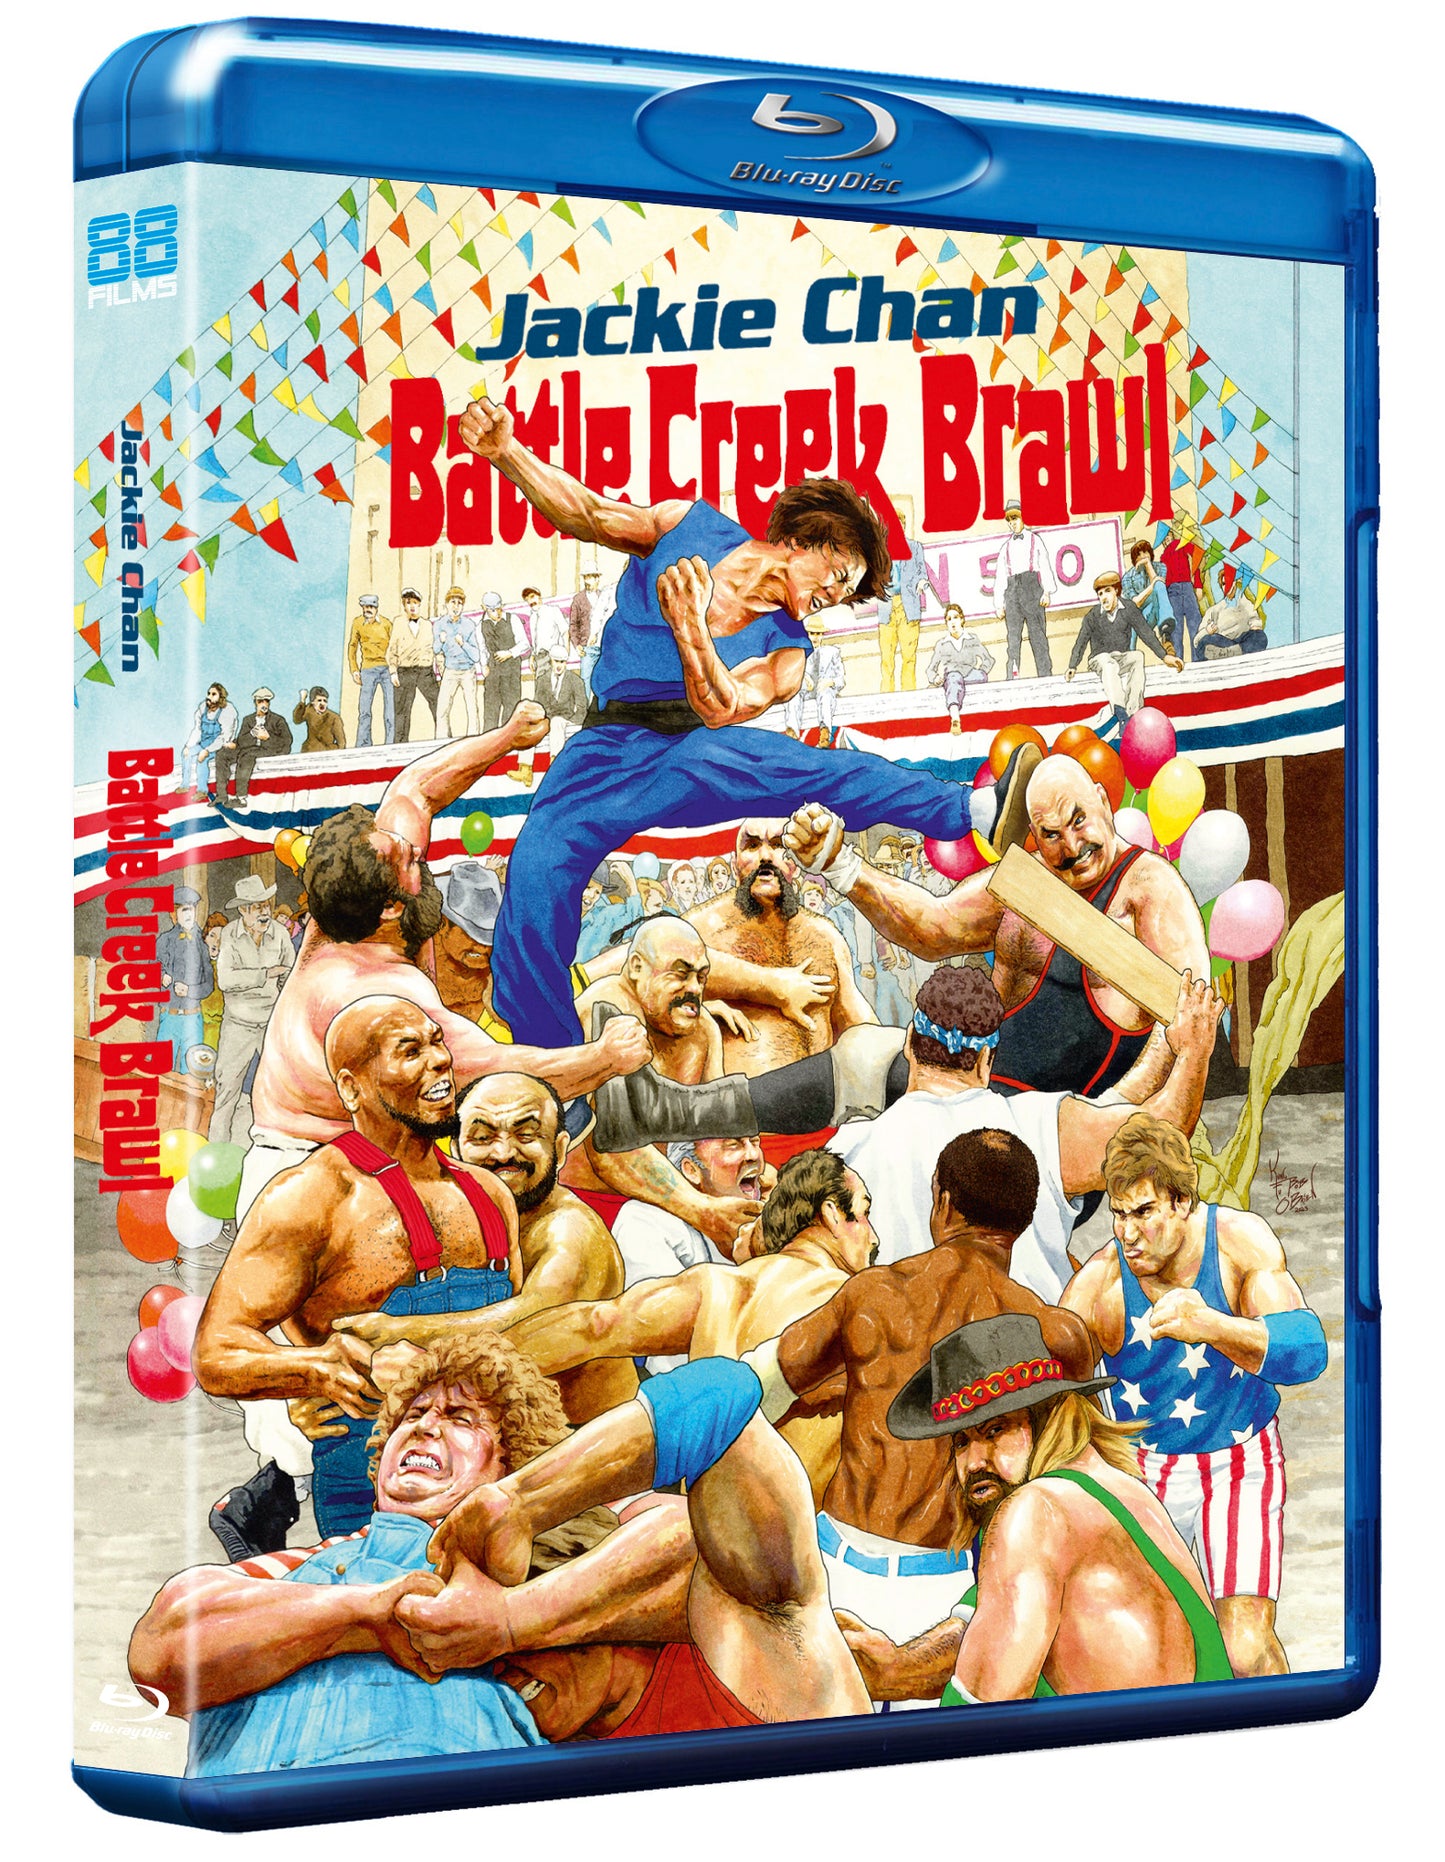 Battle Creek Brawl - Deluxe Collector's Edition